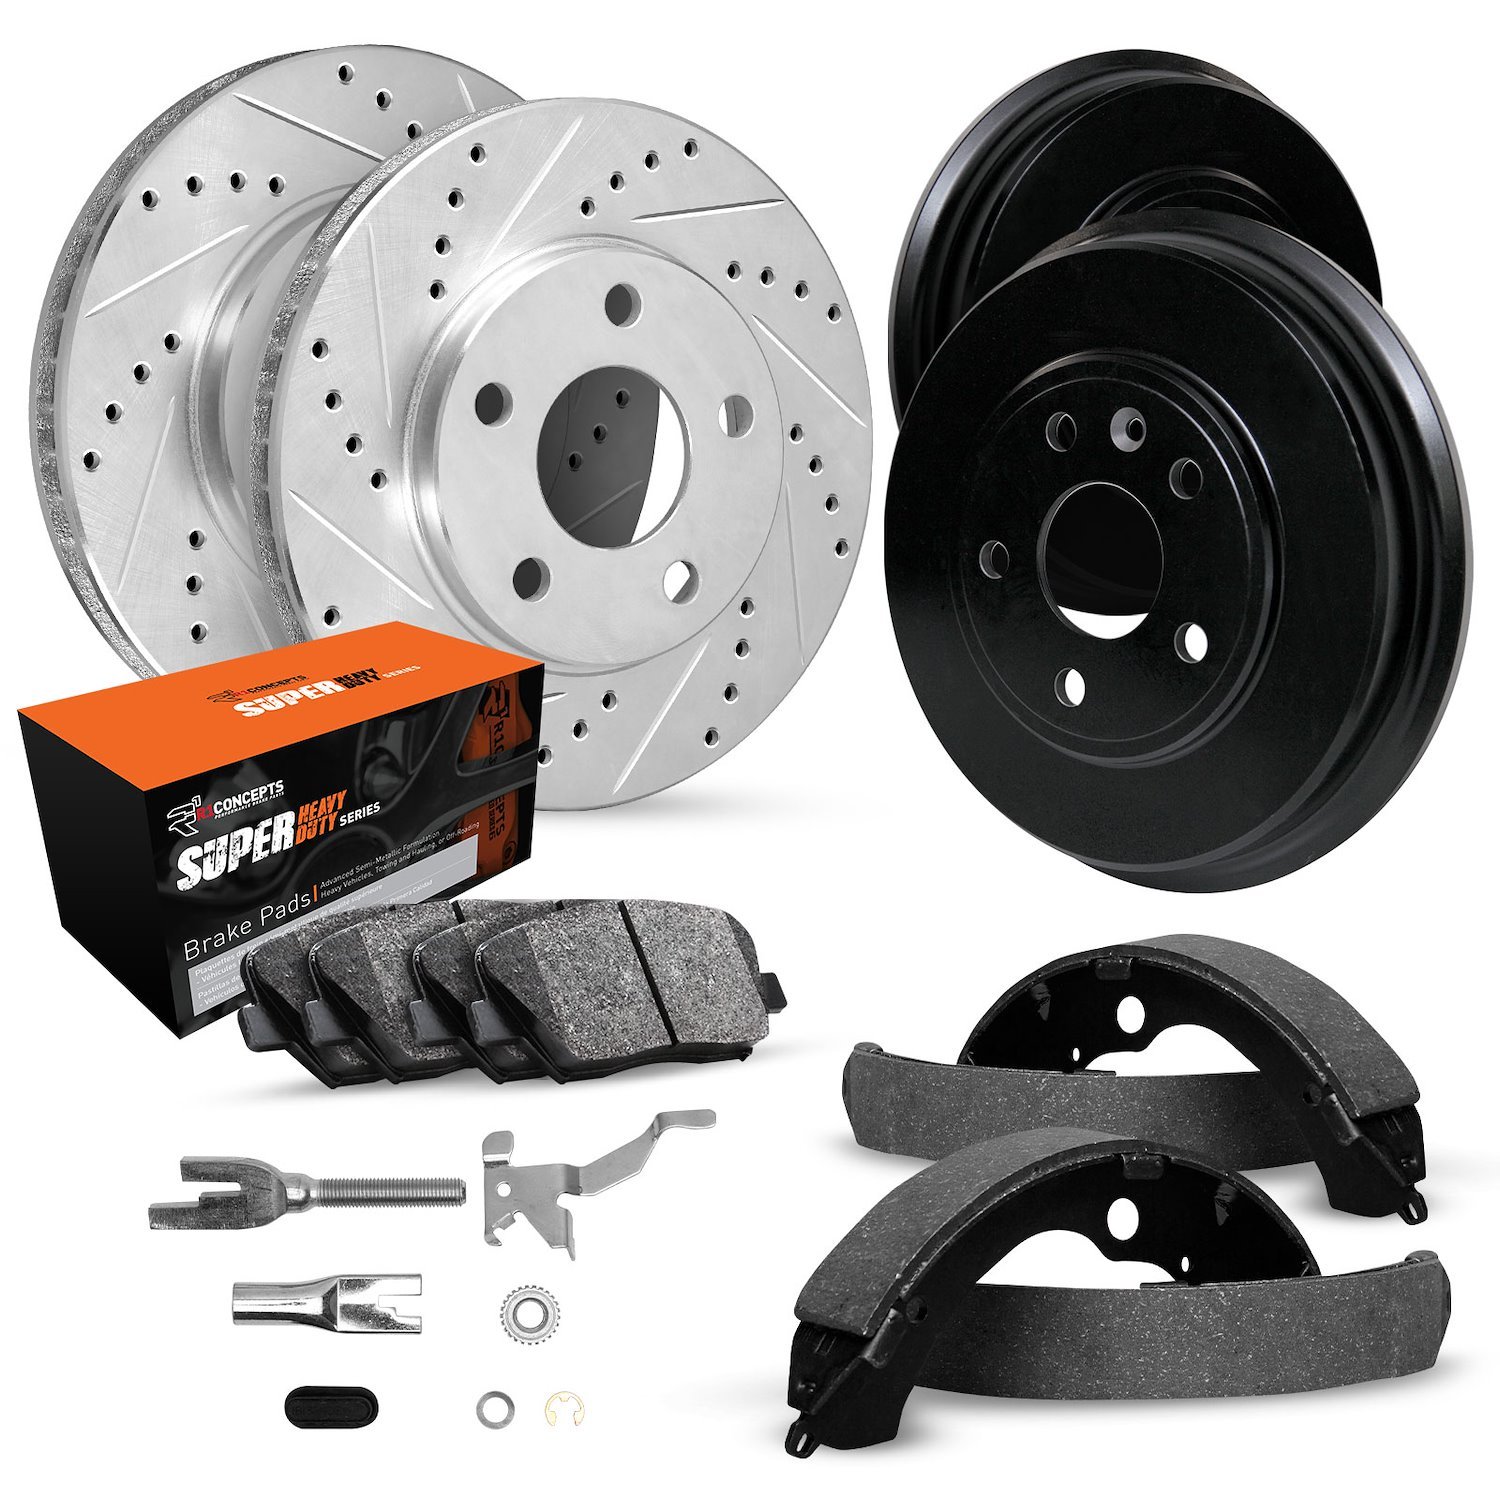 E-Line Drilled & Slotted Silver Brake Rotor & Drum Set w/Super-Duty Pads, Shoes, & Adjusters, 1974-1991 GM